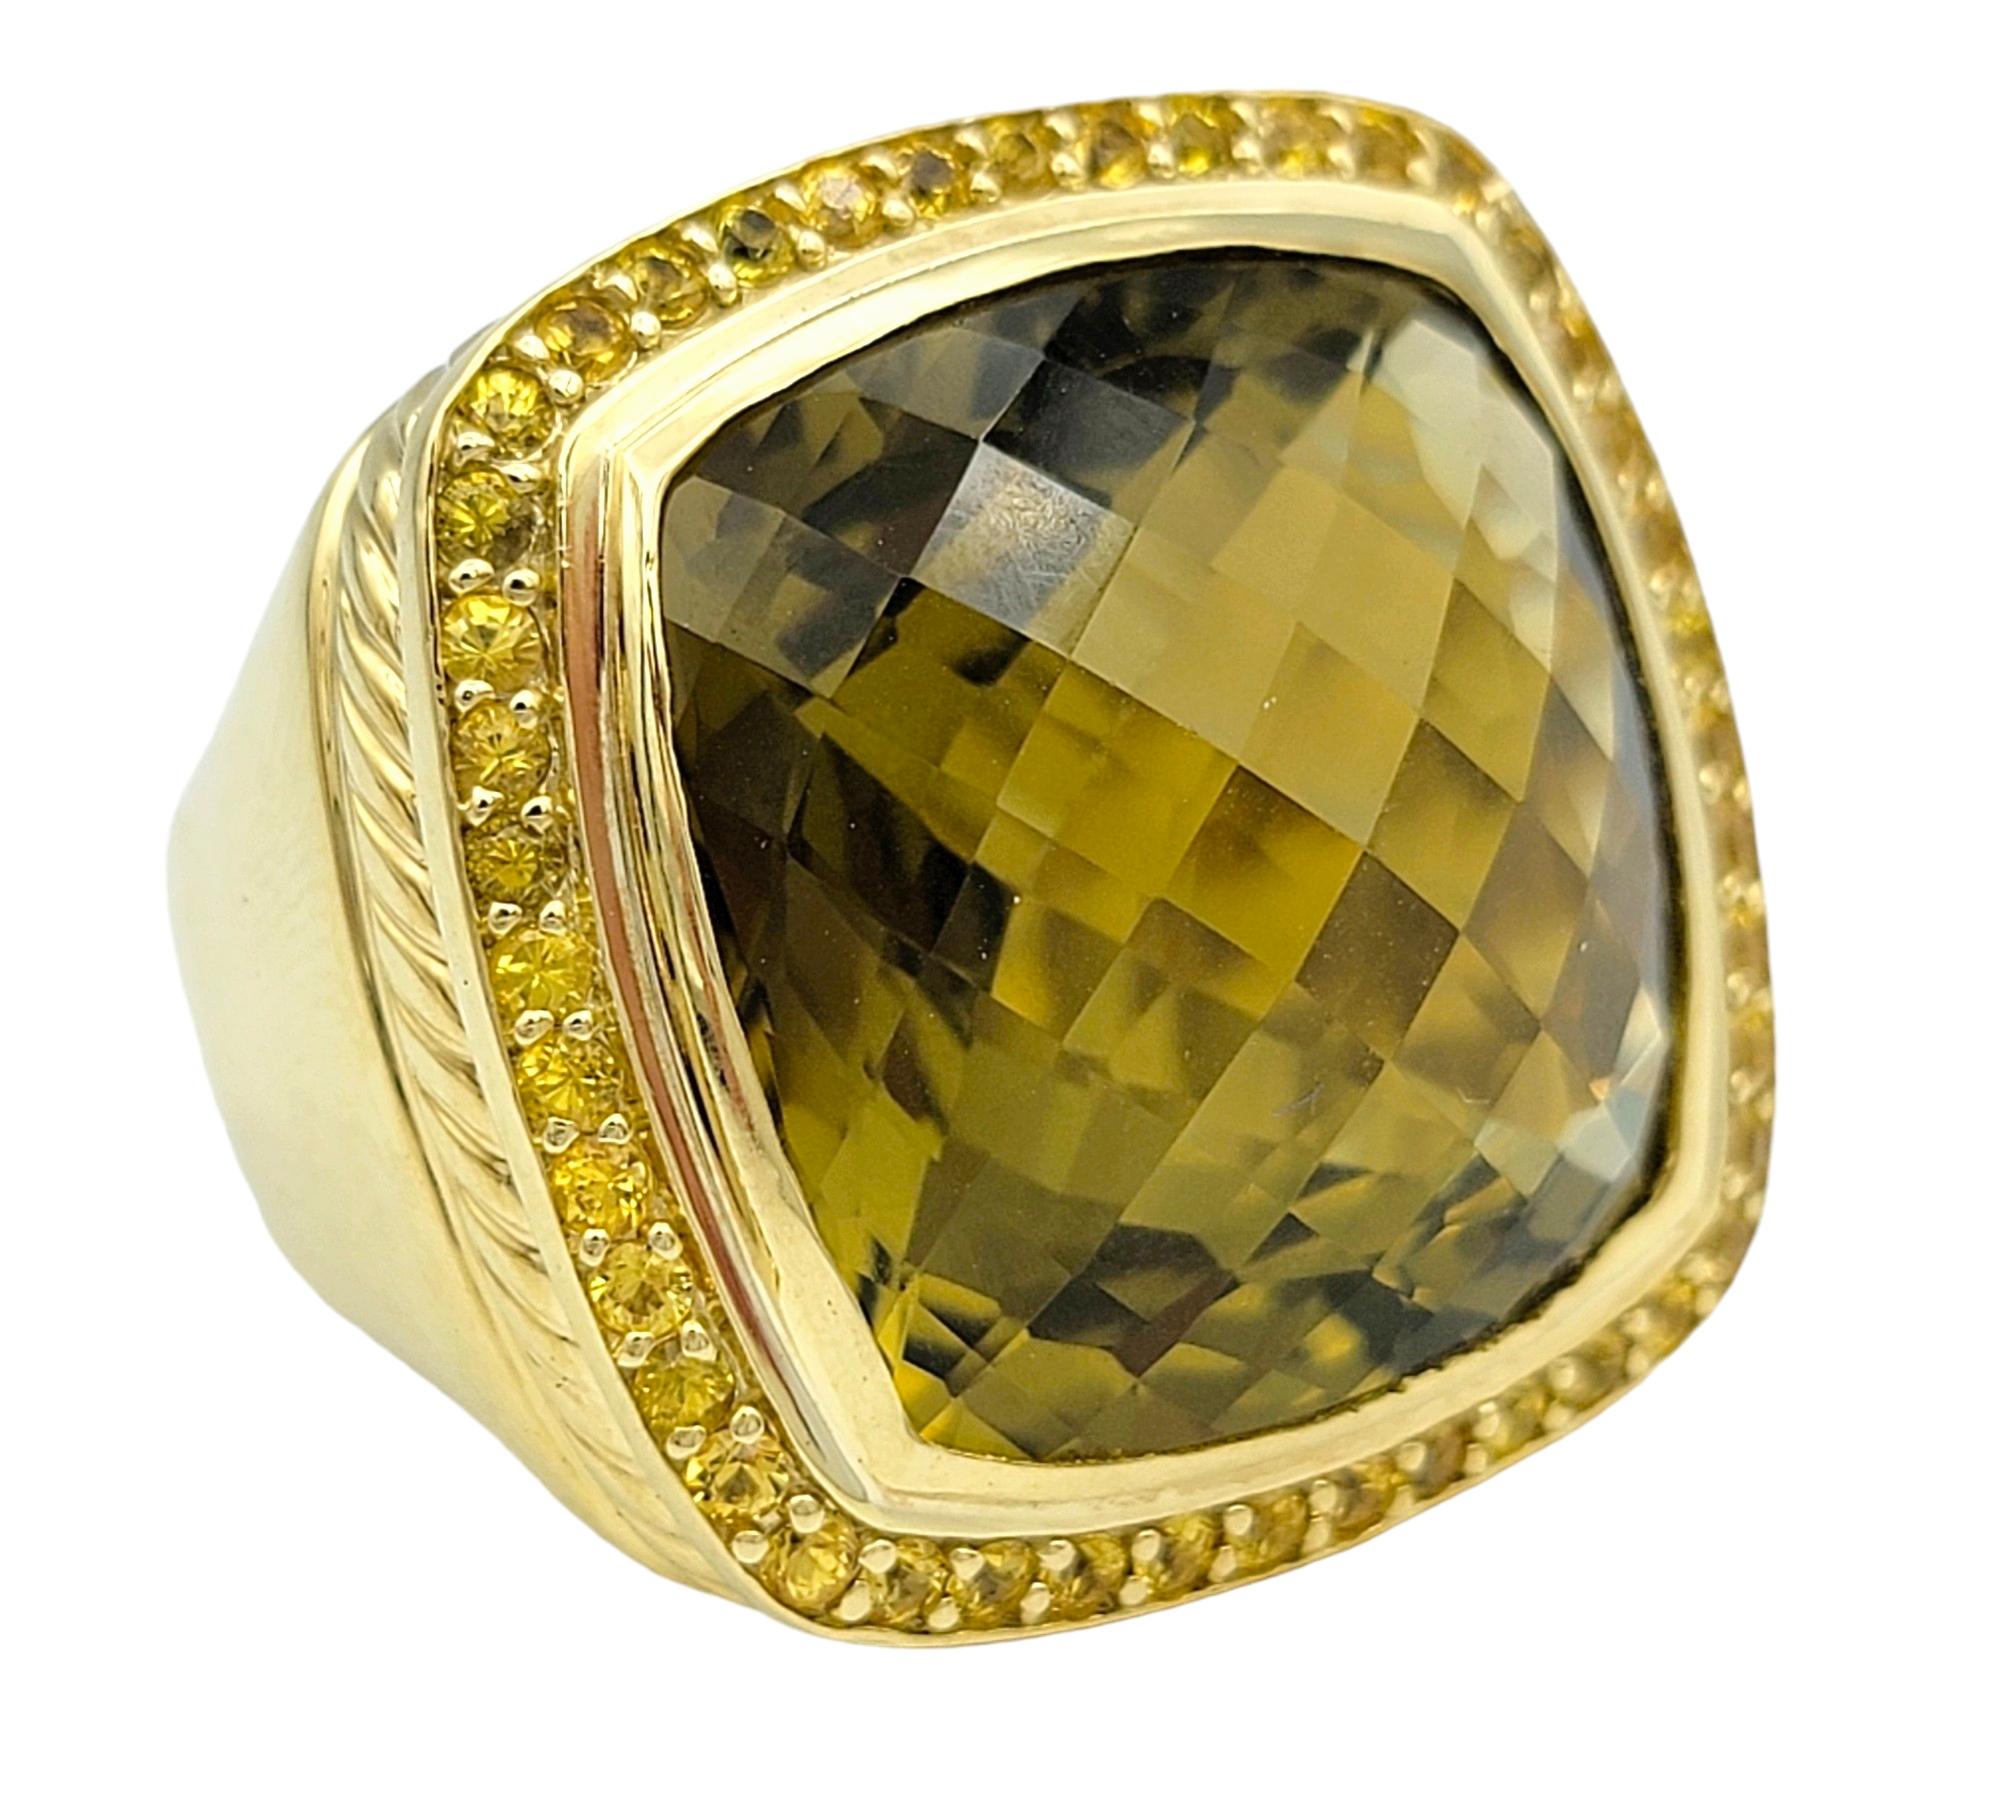 Ring Size: 9

This exquisite David Yurman large cushion citrine Albion ring is a captivating piece of jewelry that exudes elegance and sophistication. Featuring a stunning cushion-cut citrine gemstone as its centerpiece, this ring showcases the warm